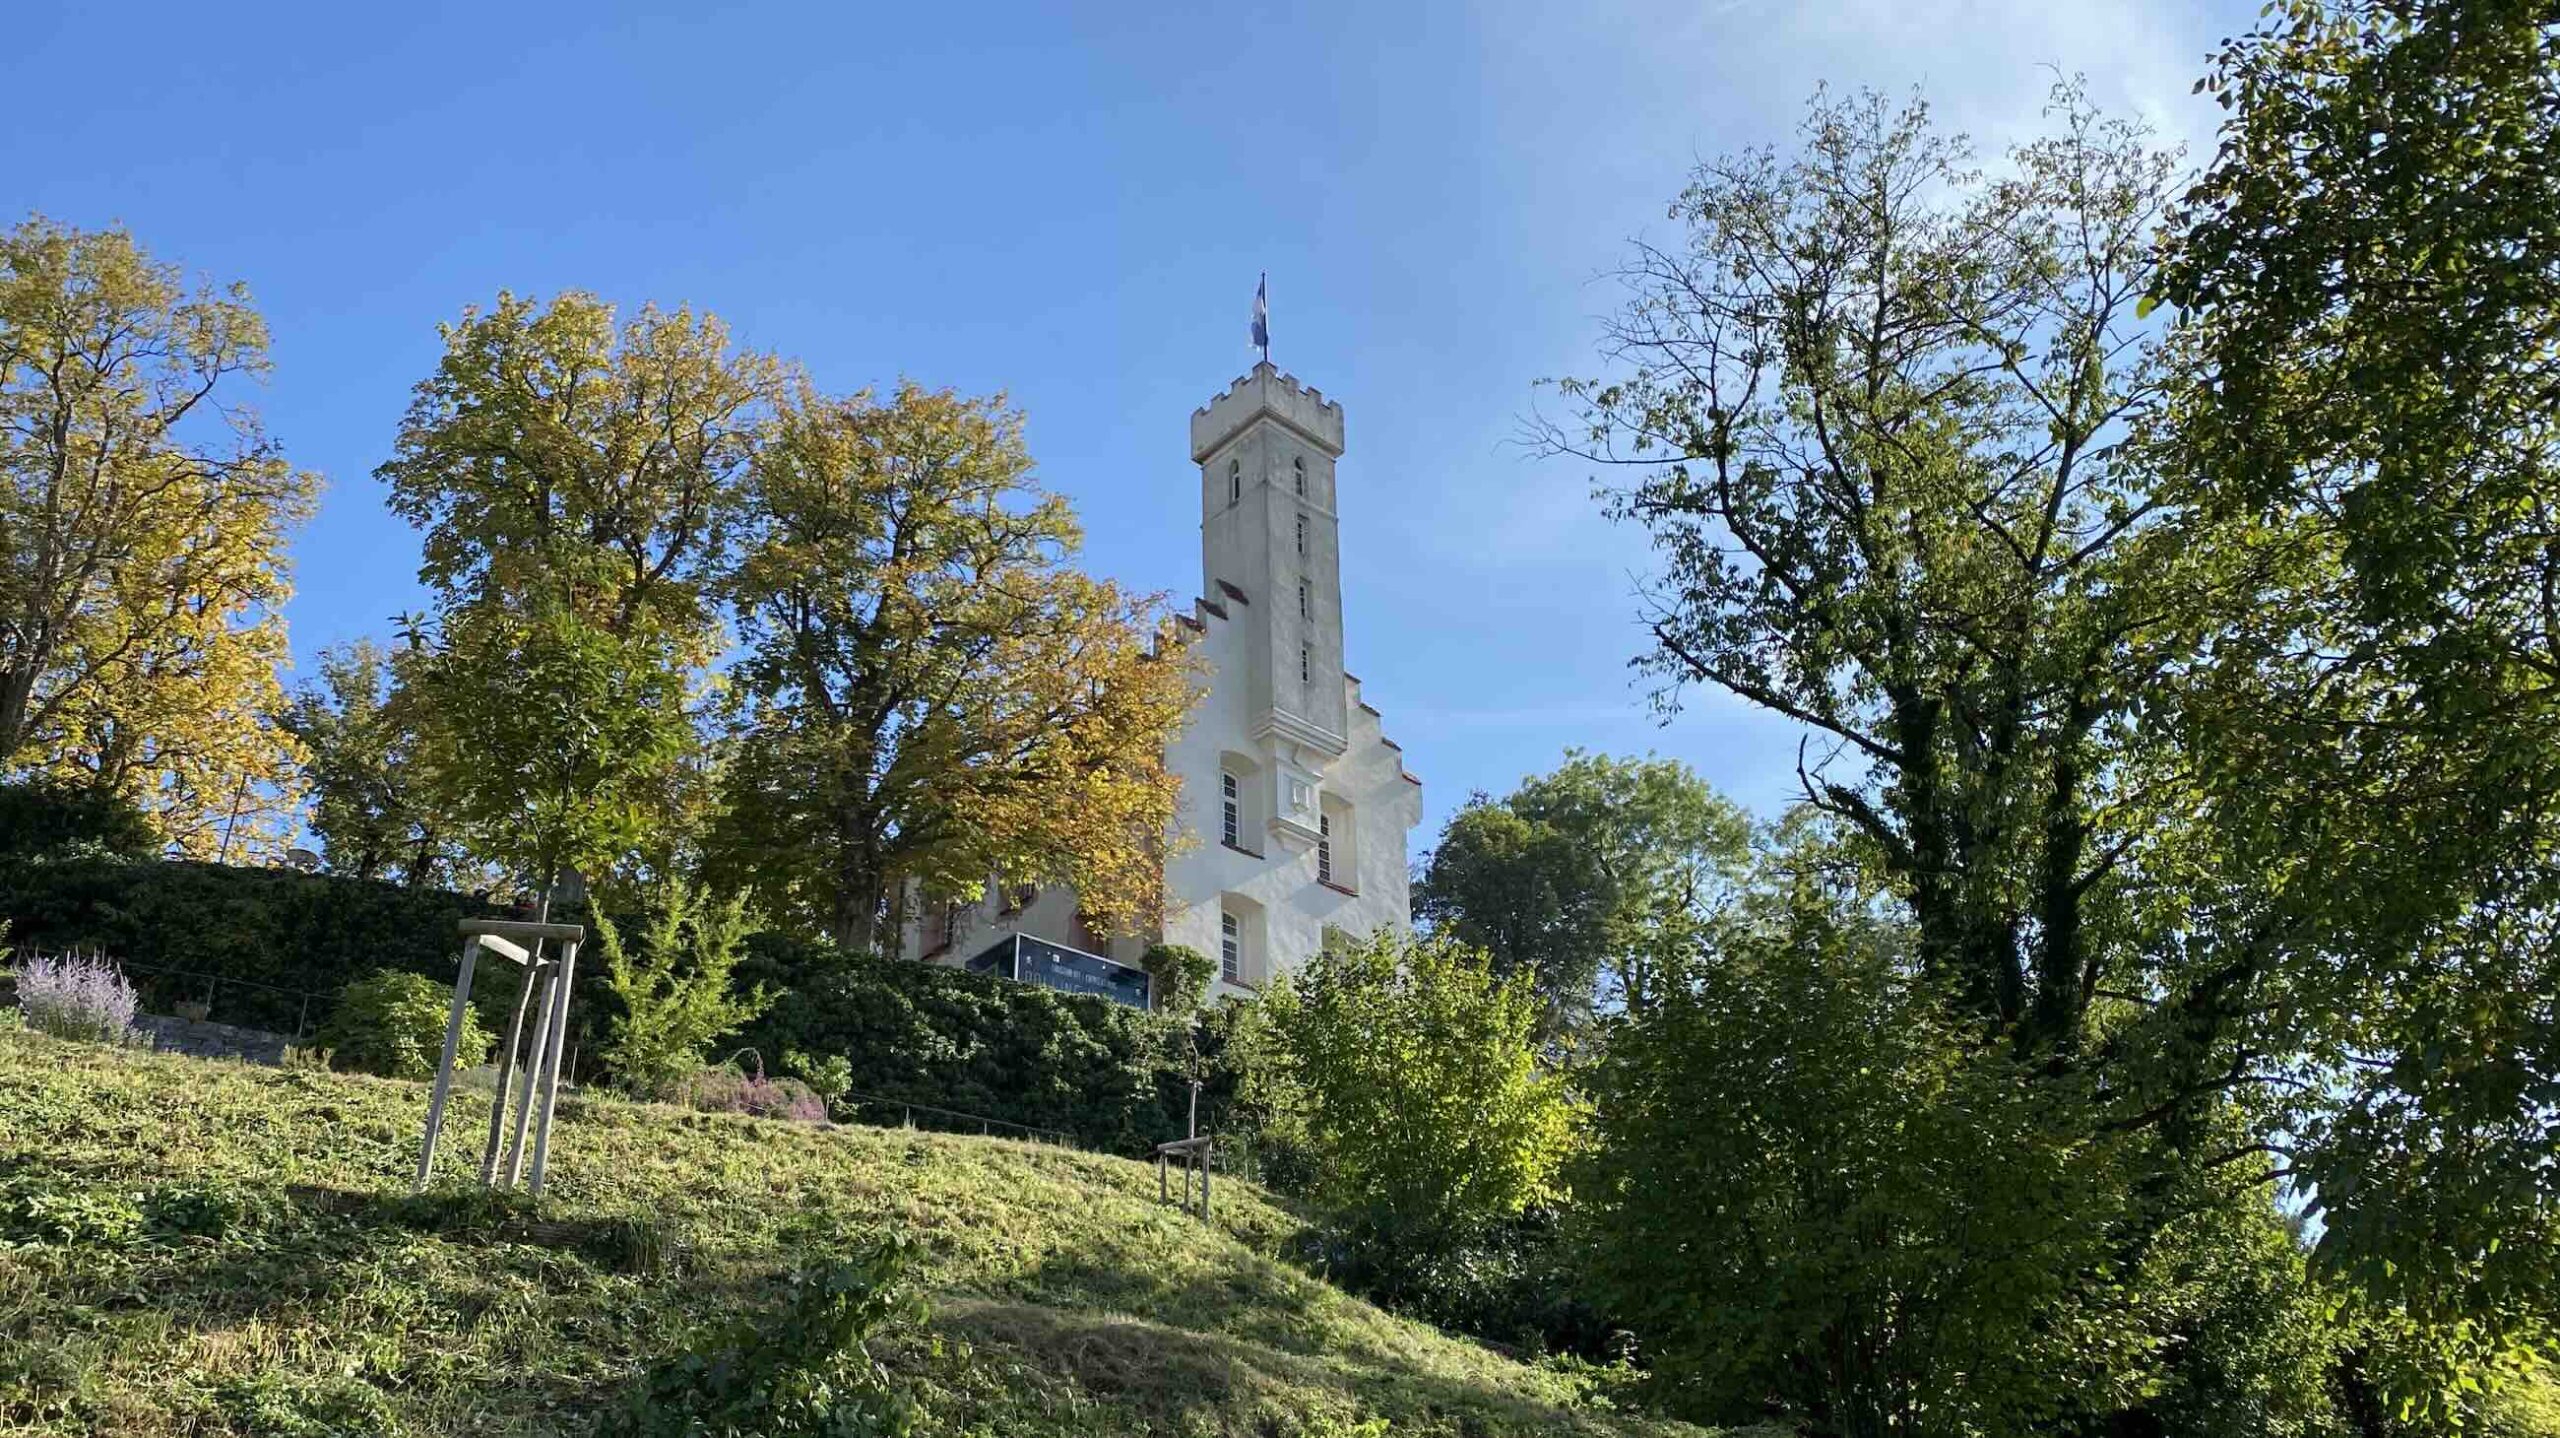 Veitsburg Castle walk with small hilltop church while exploring Ravensburg Germany